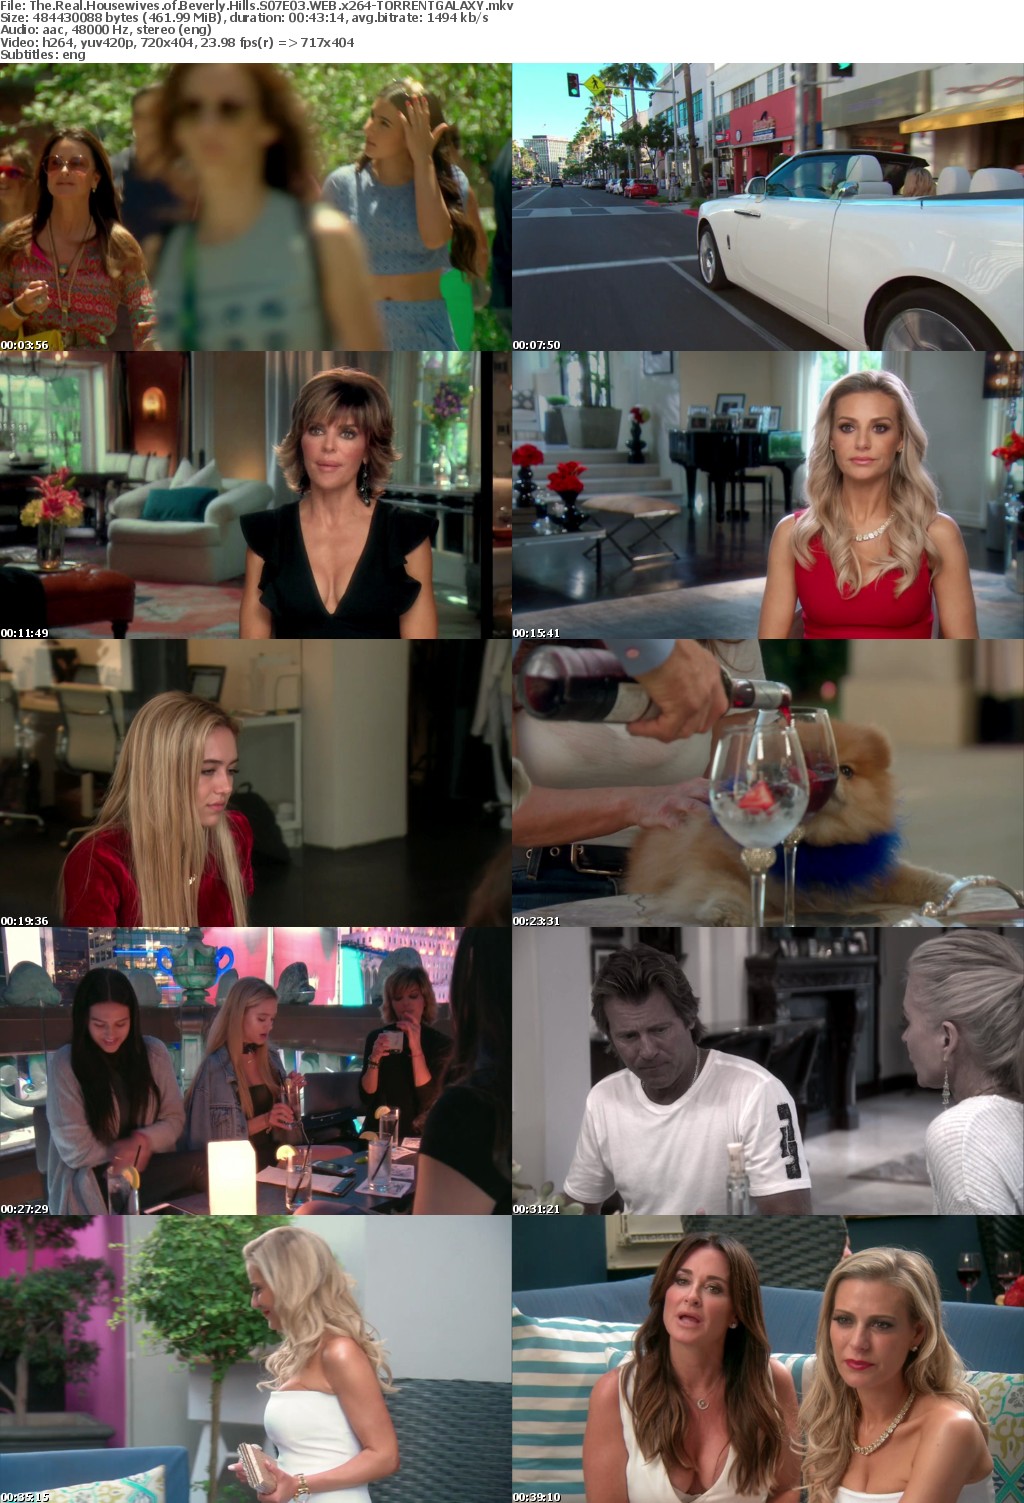 The Real Housewives of Beverly Hills S07E03 WEB x264-GALAXY